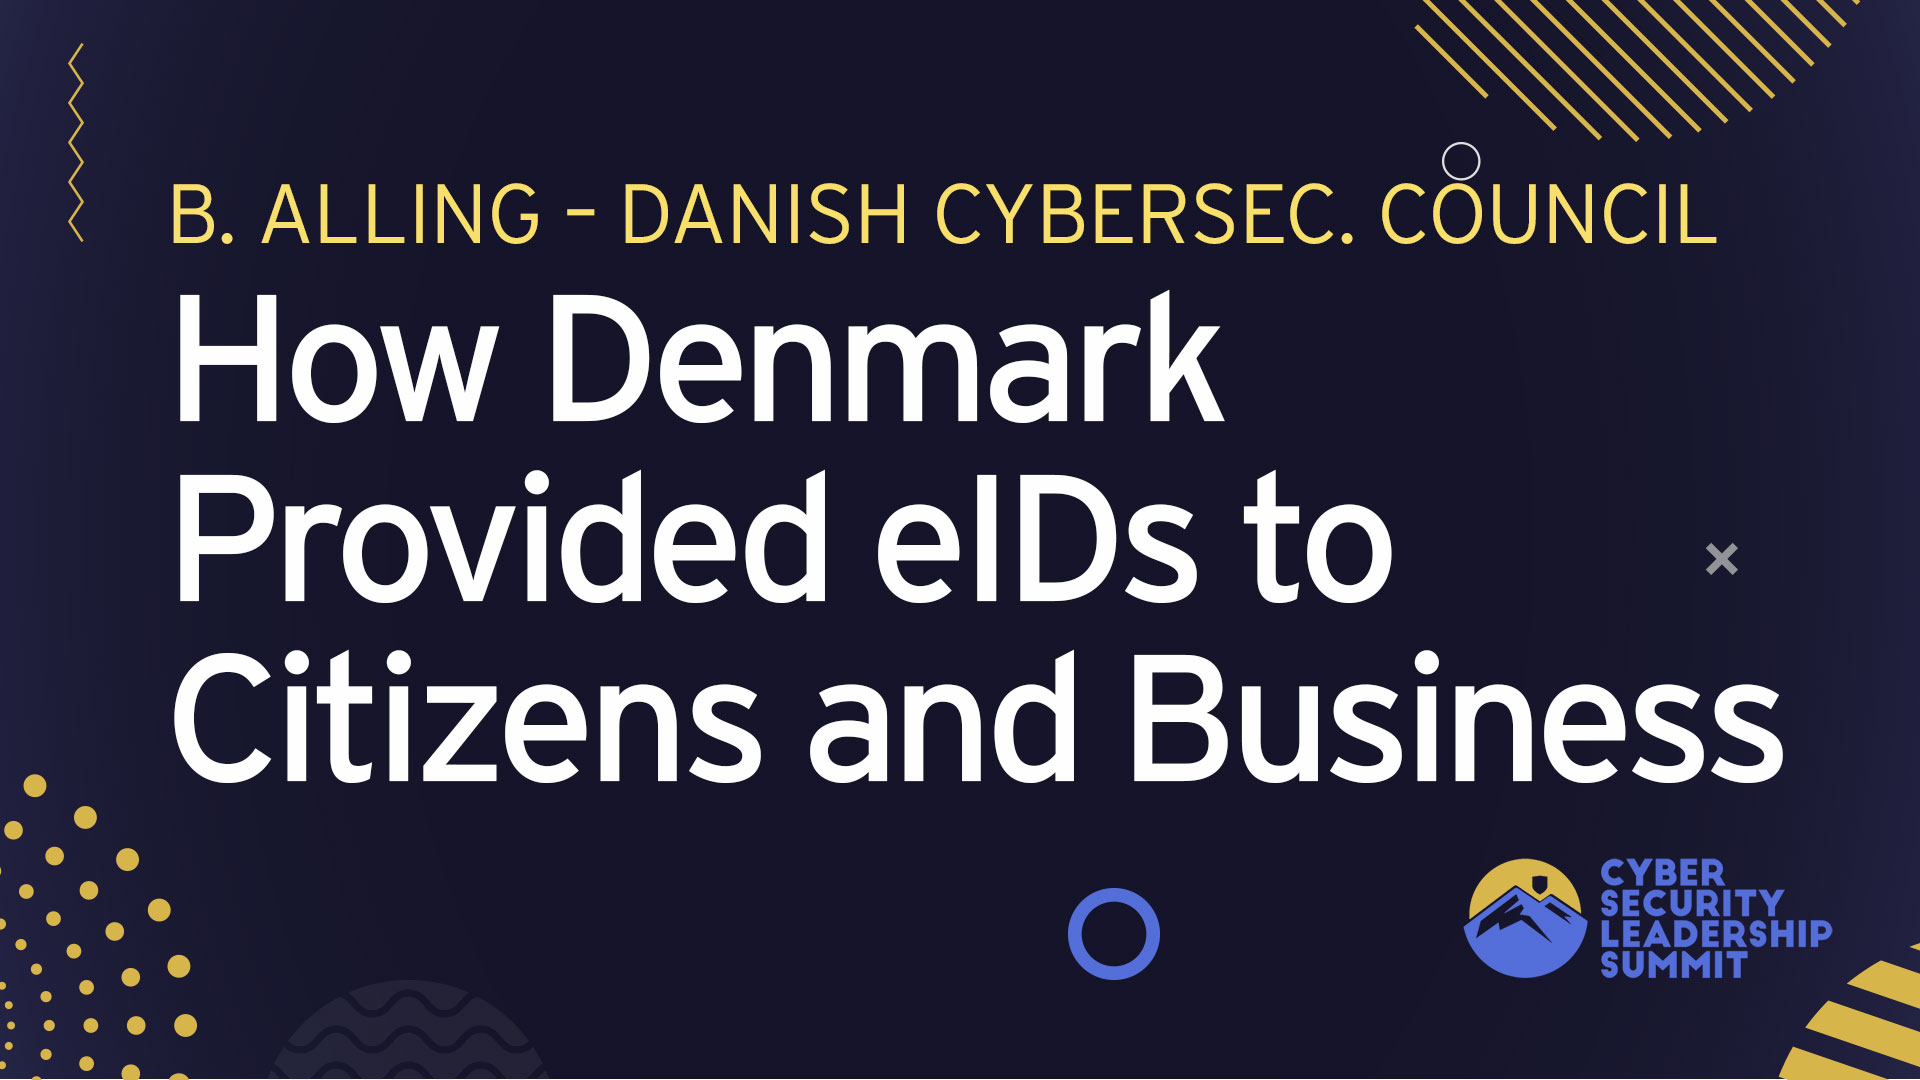 The Blueprint for a Cyber-Safe Society: How Denmark provided eIDs to citizens and business